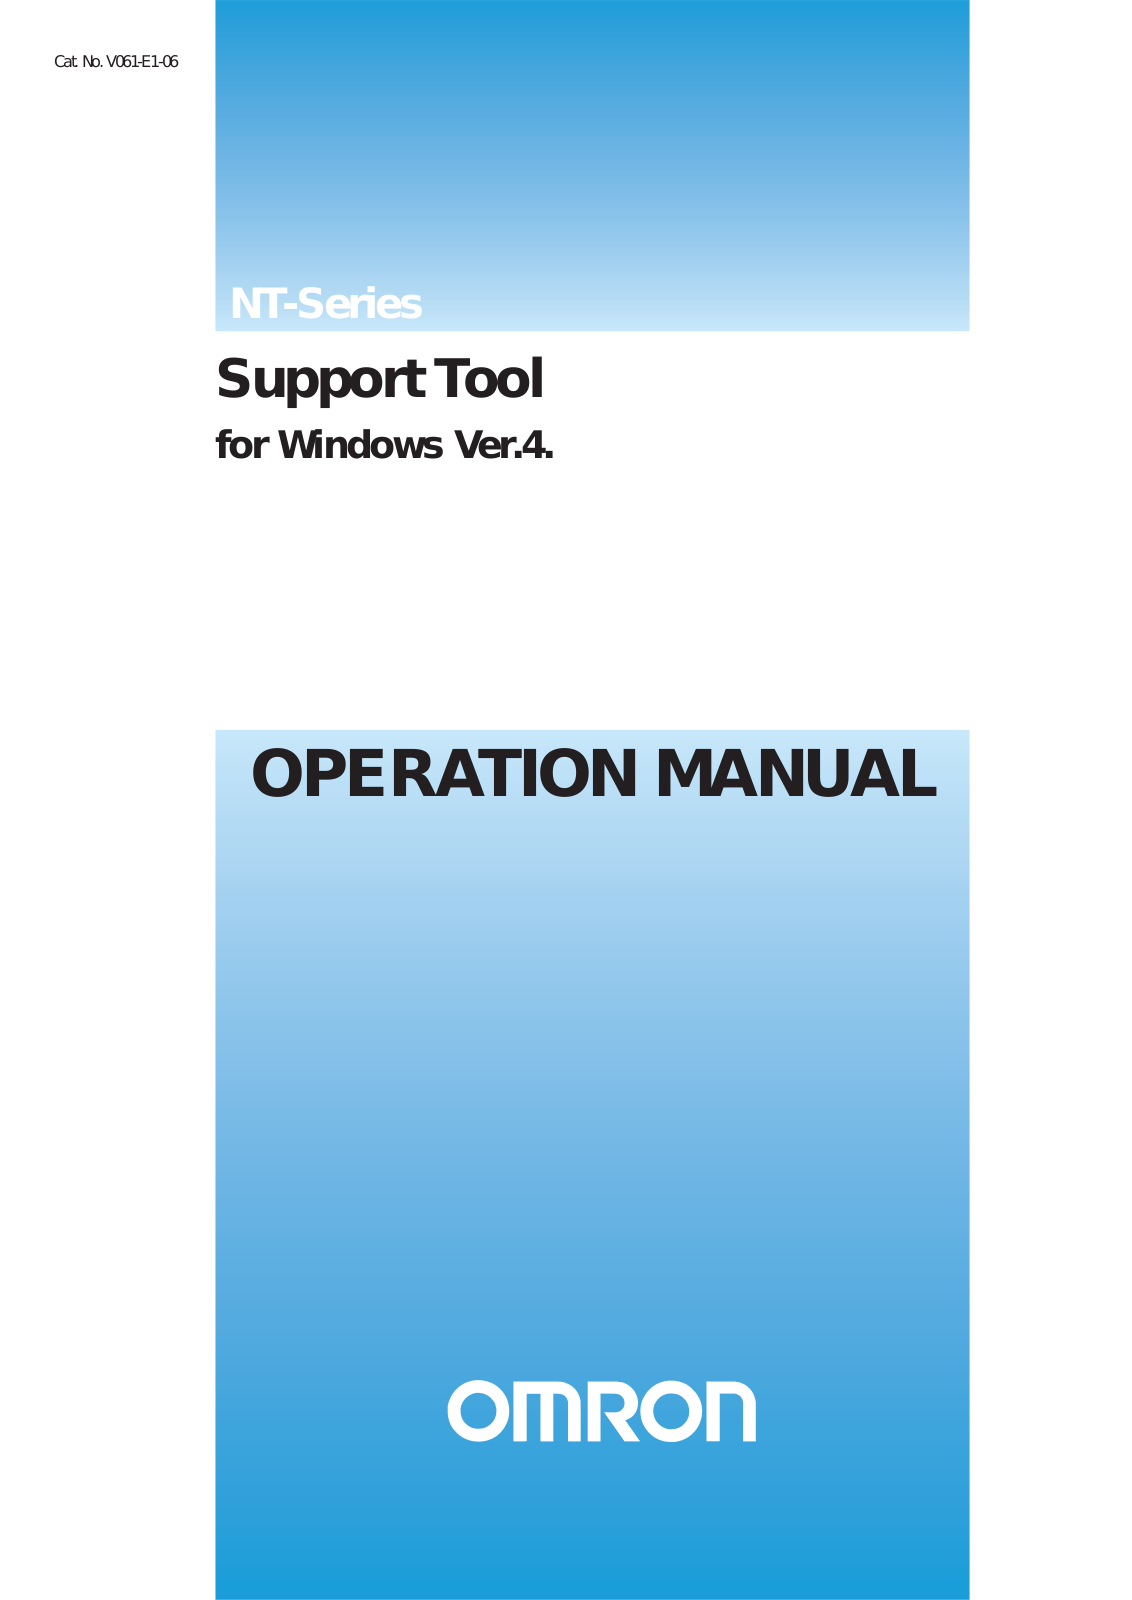 Omron NT-SERIES SUPPORT TOOL FOR WINDOWS User Manual